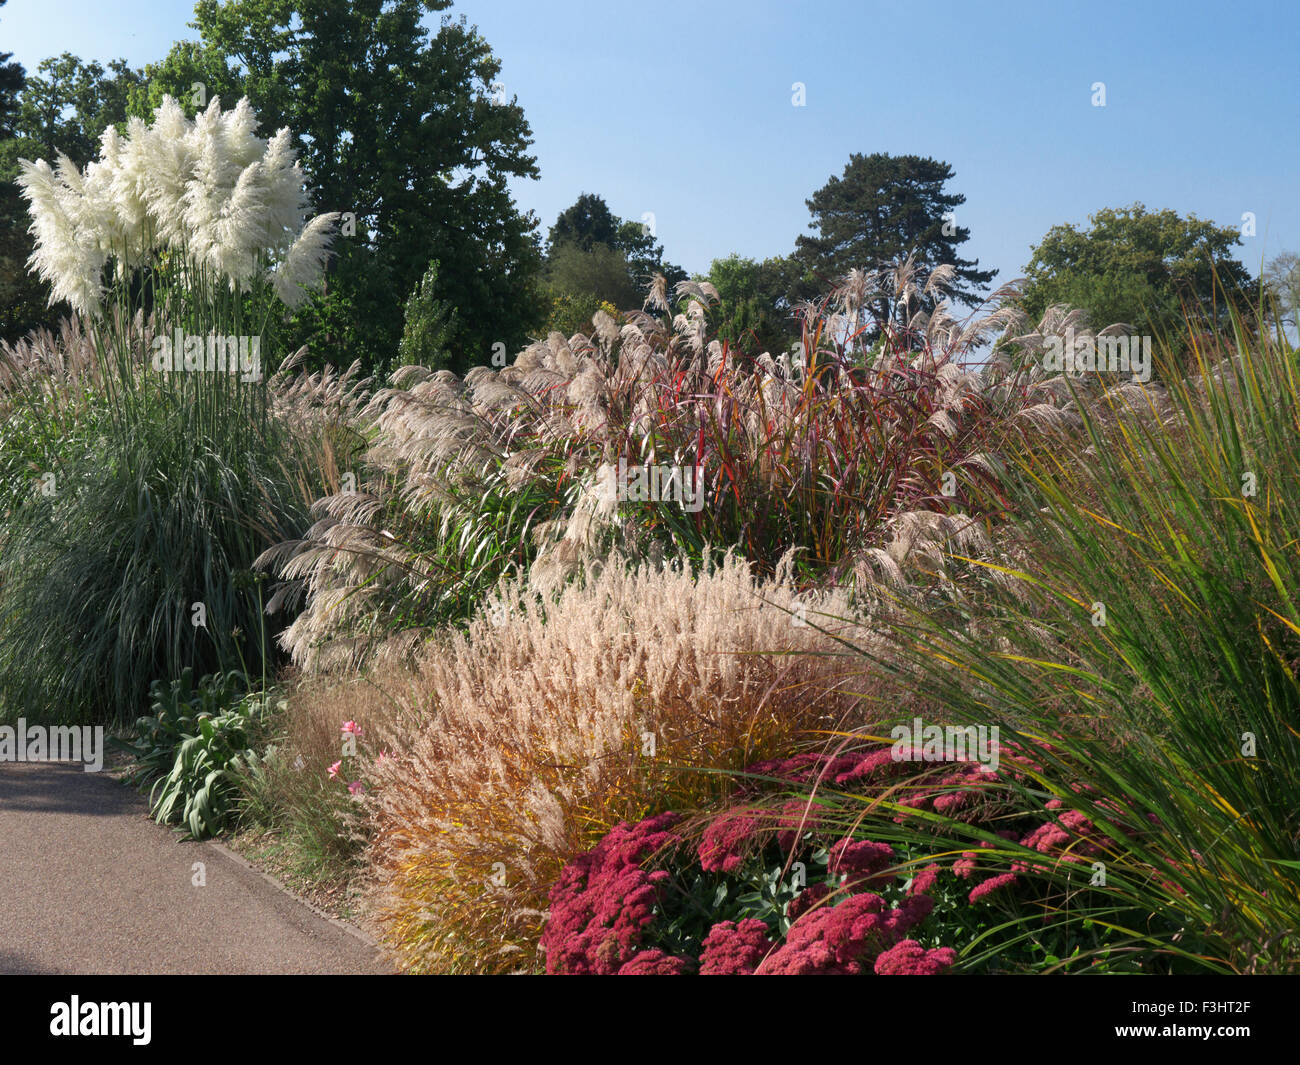 Cortaderia selloana, commonly known as Pampas Grass with varieties of ornamental grasses in foregound Stock Photo